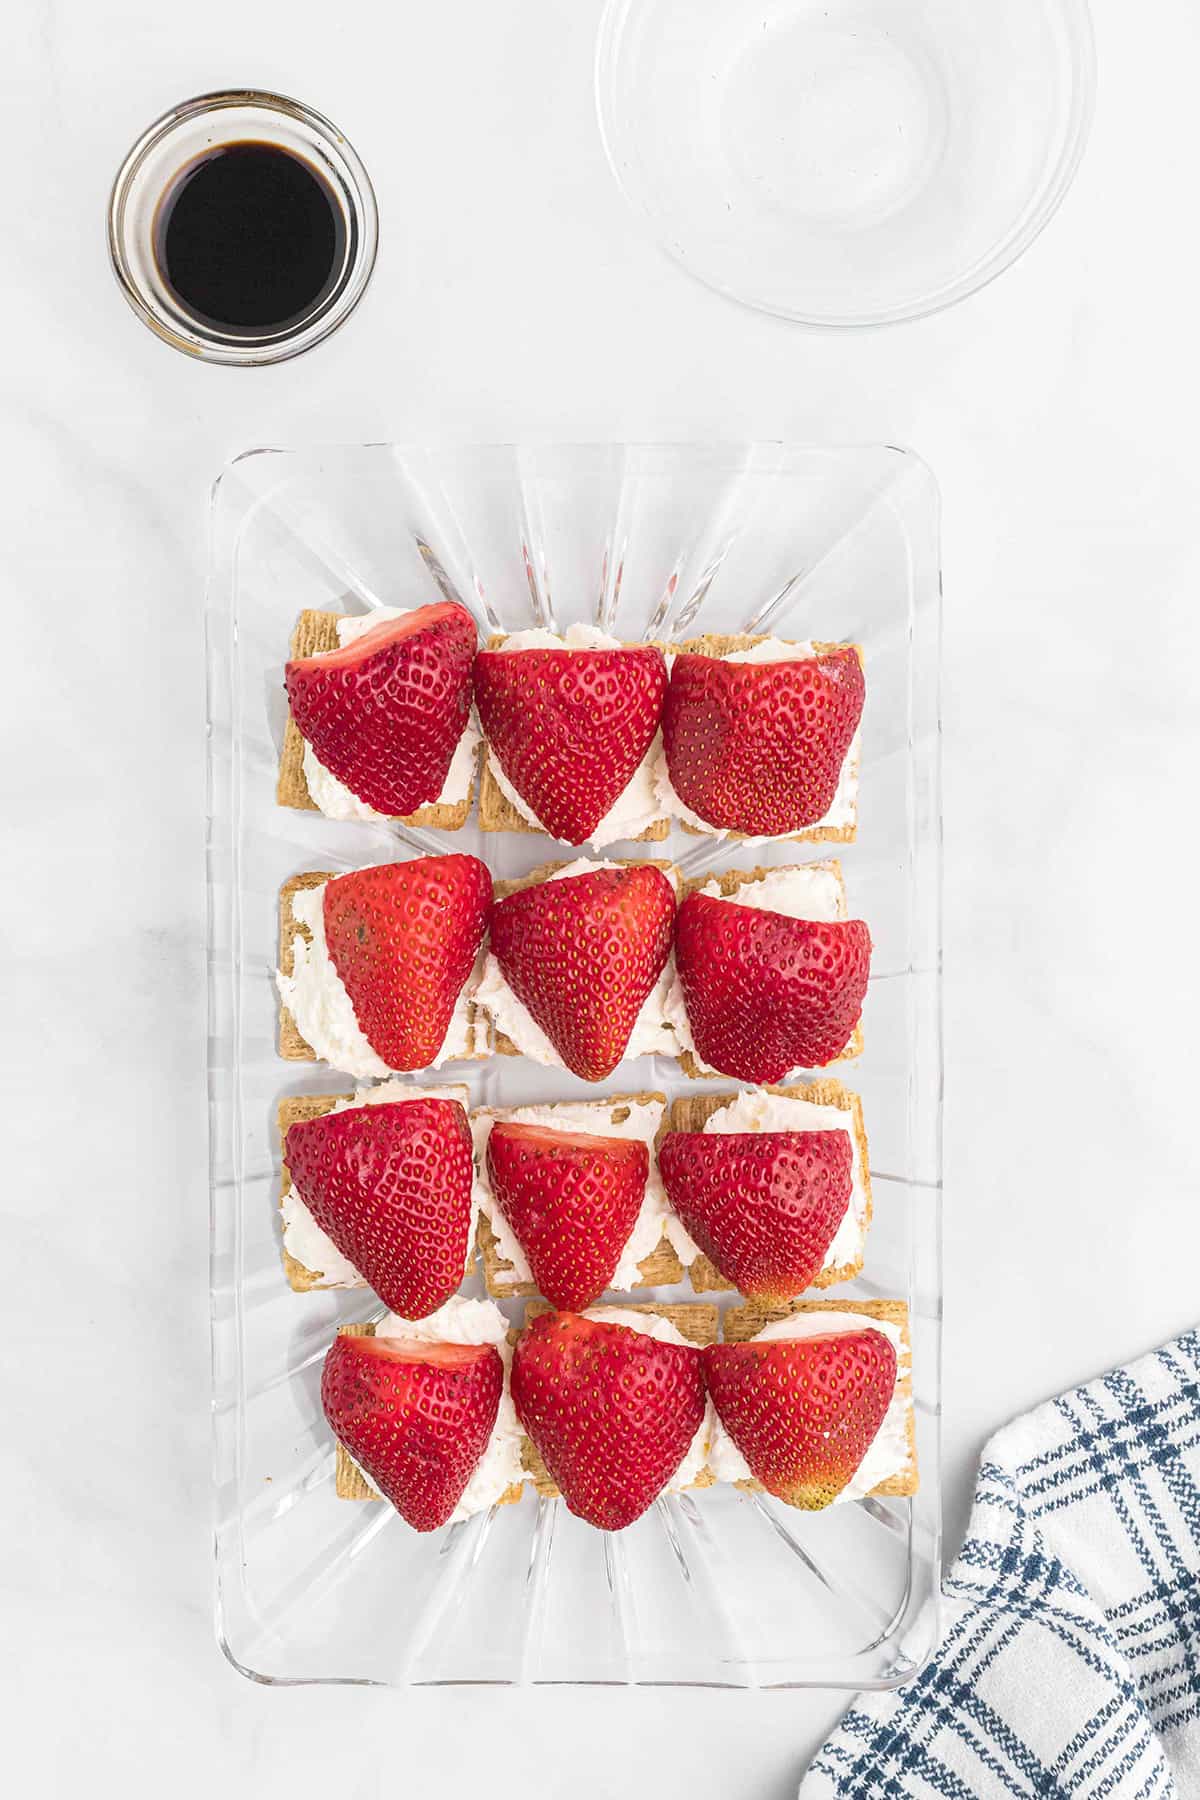 Crackers topped with cream cheese and strawberry halves.